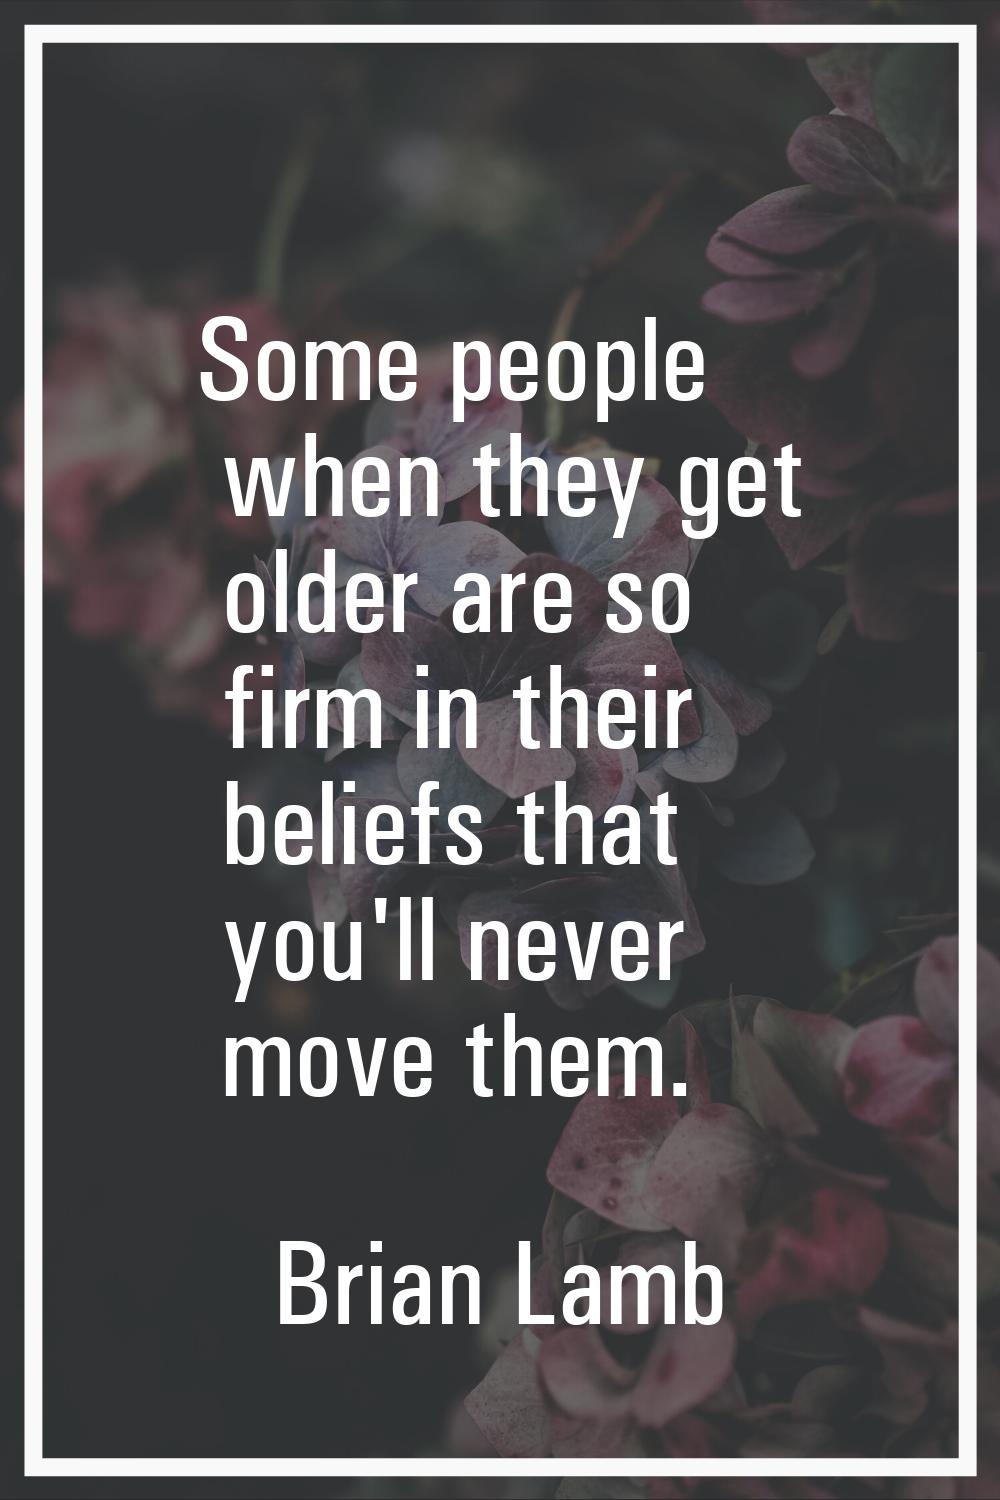 Some people when they get older are so firm in their beliefs that you'll never move them.